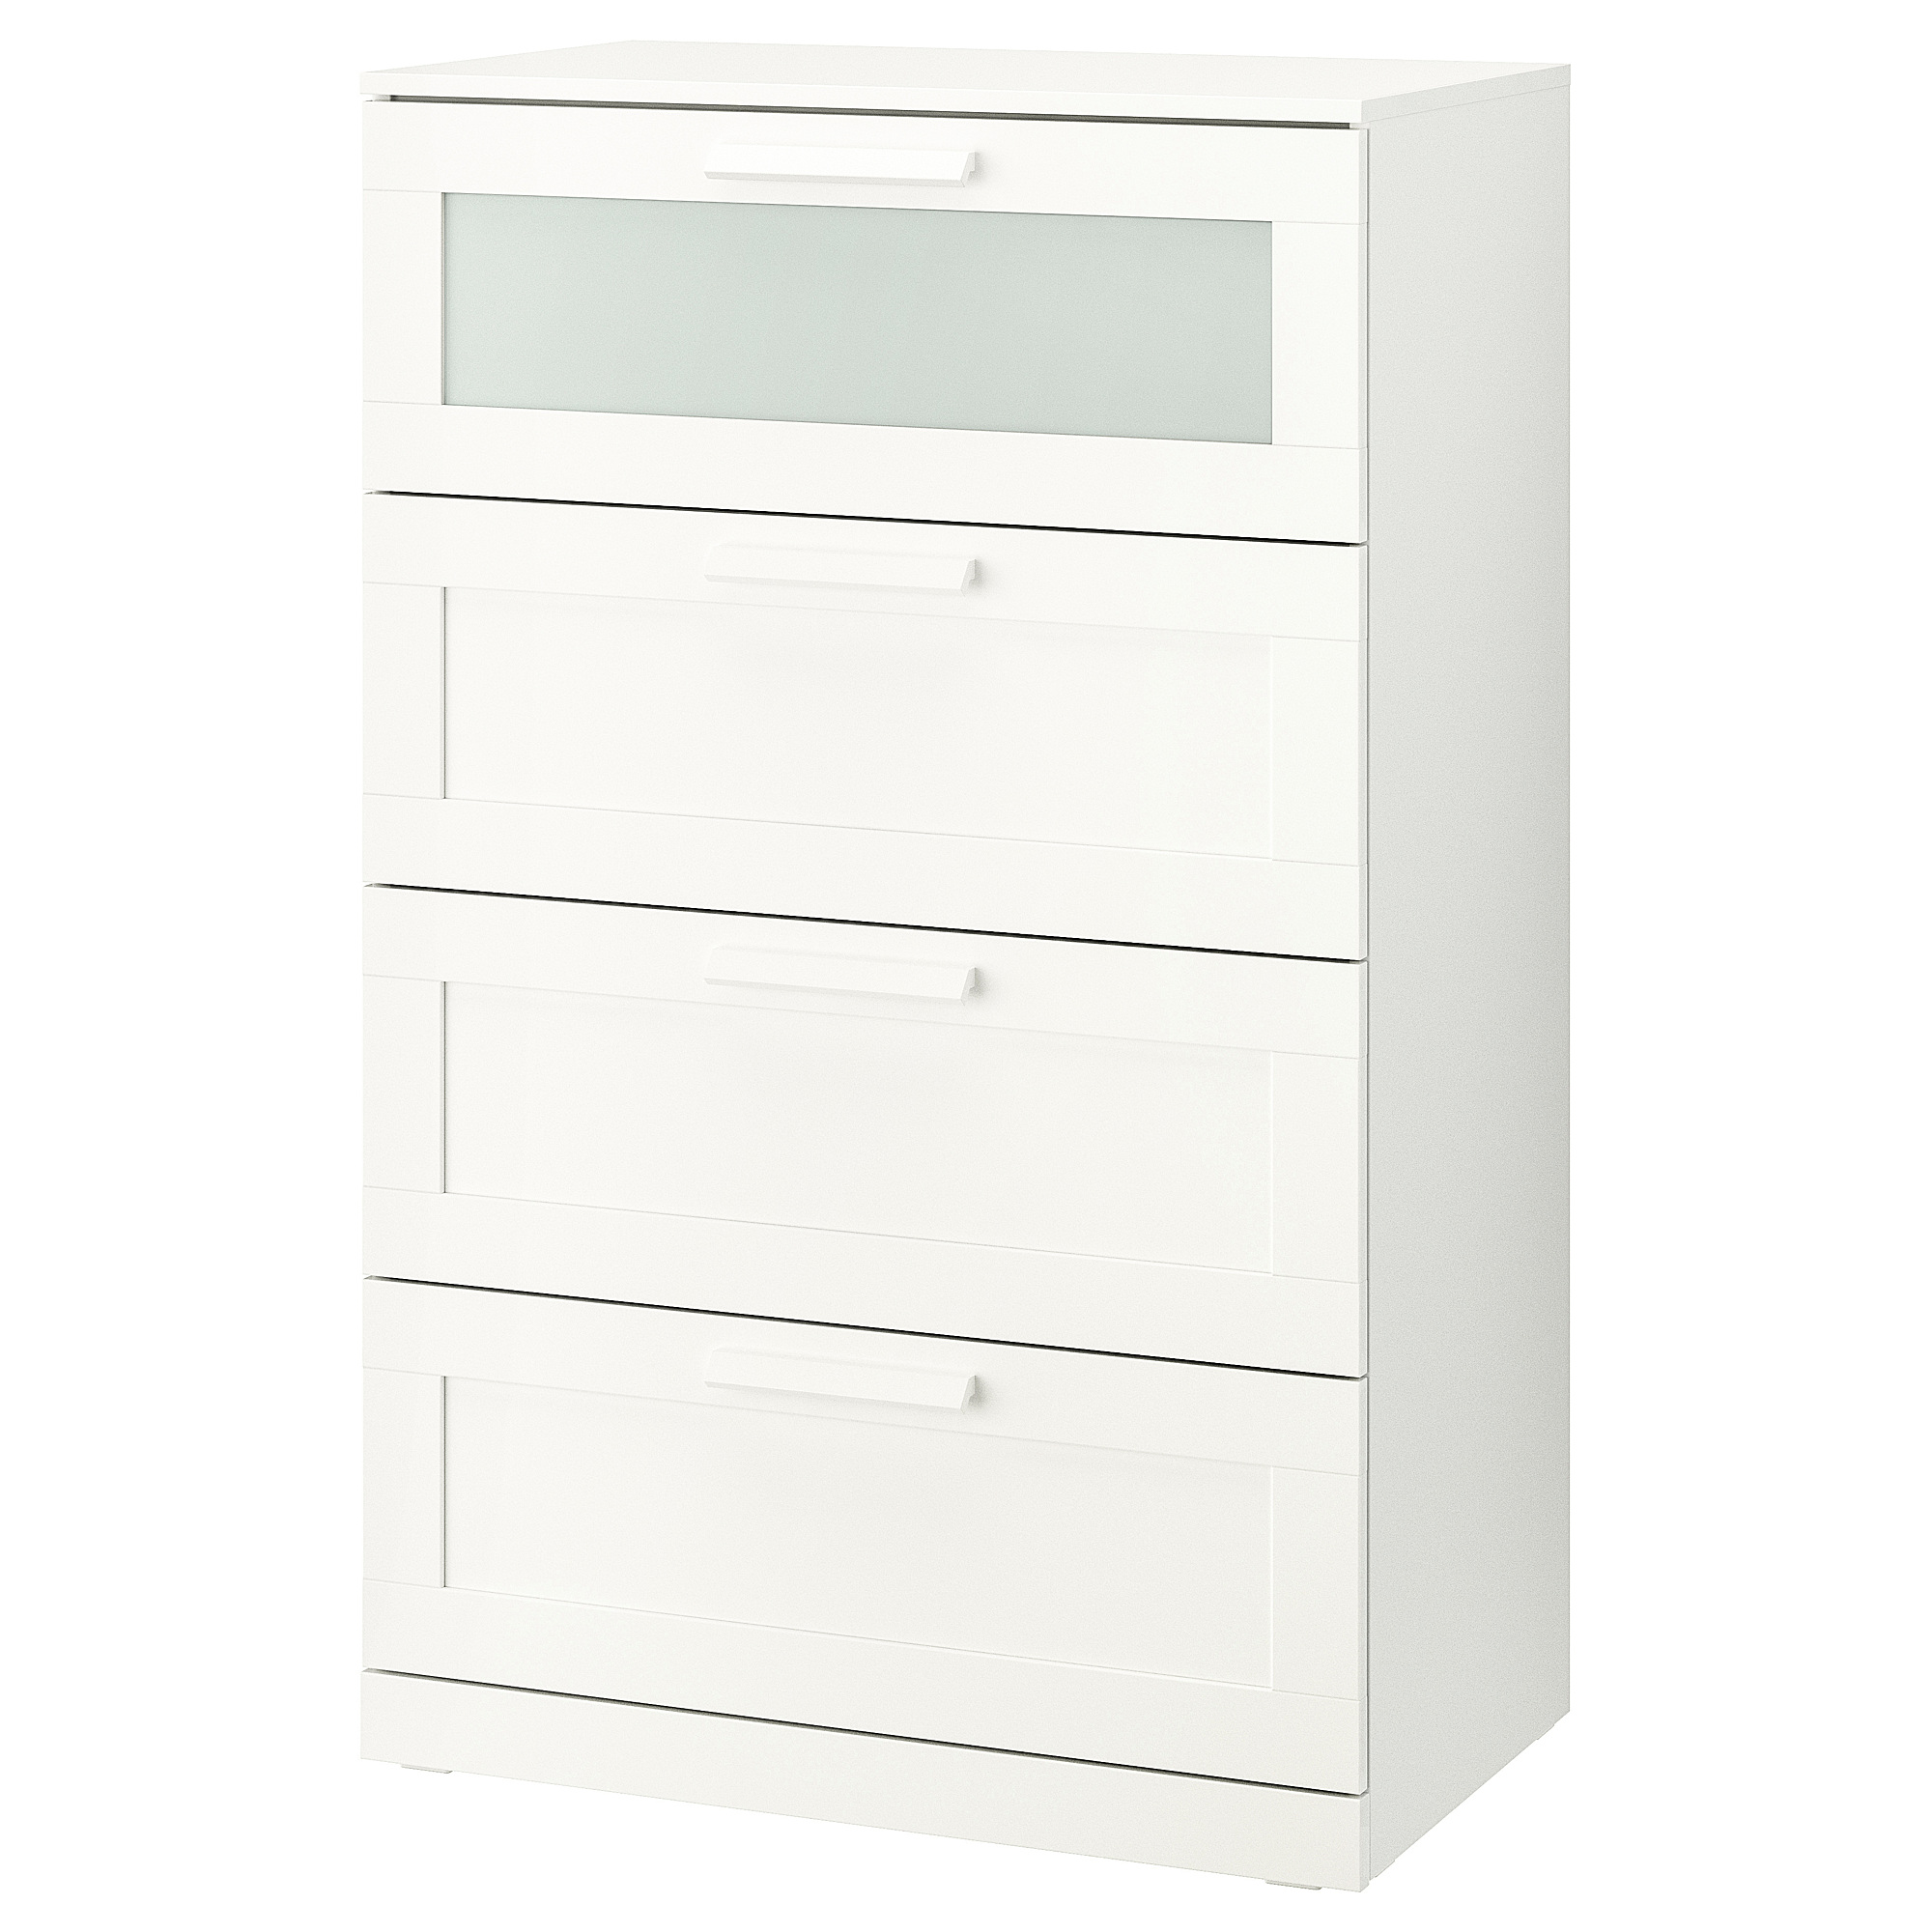 BRIMNES chest of 4 drawers